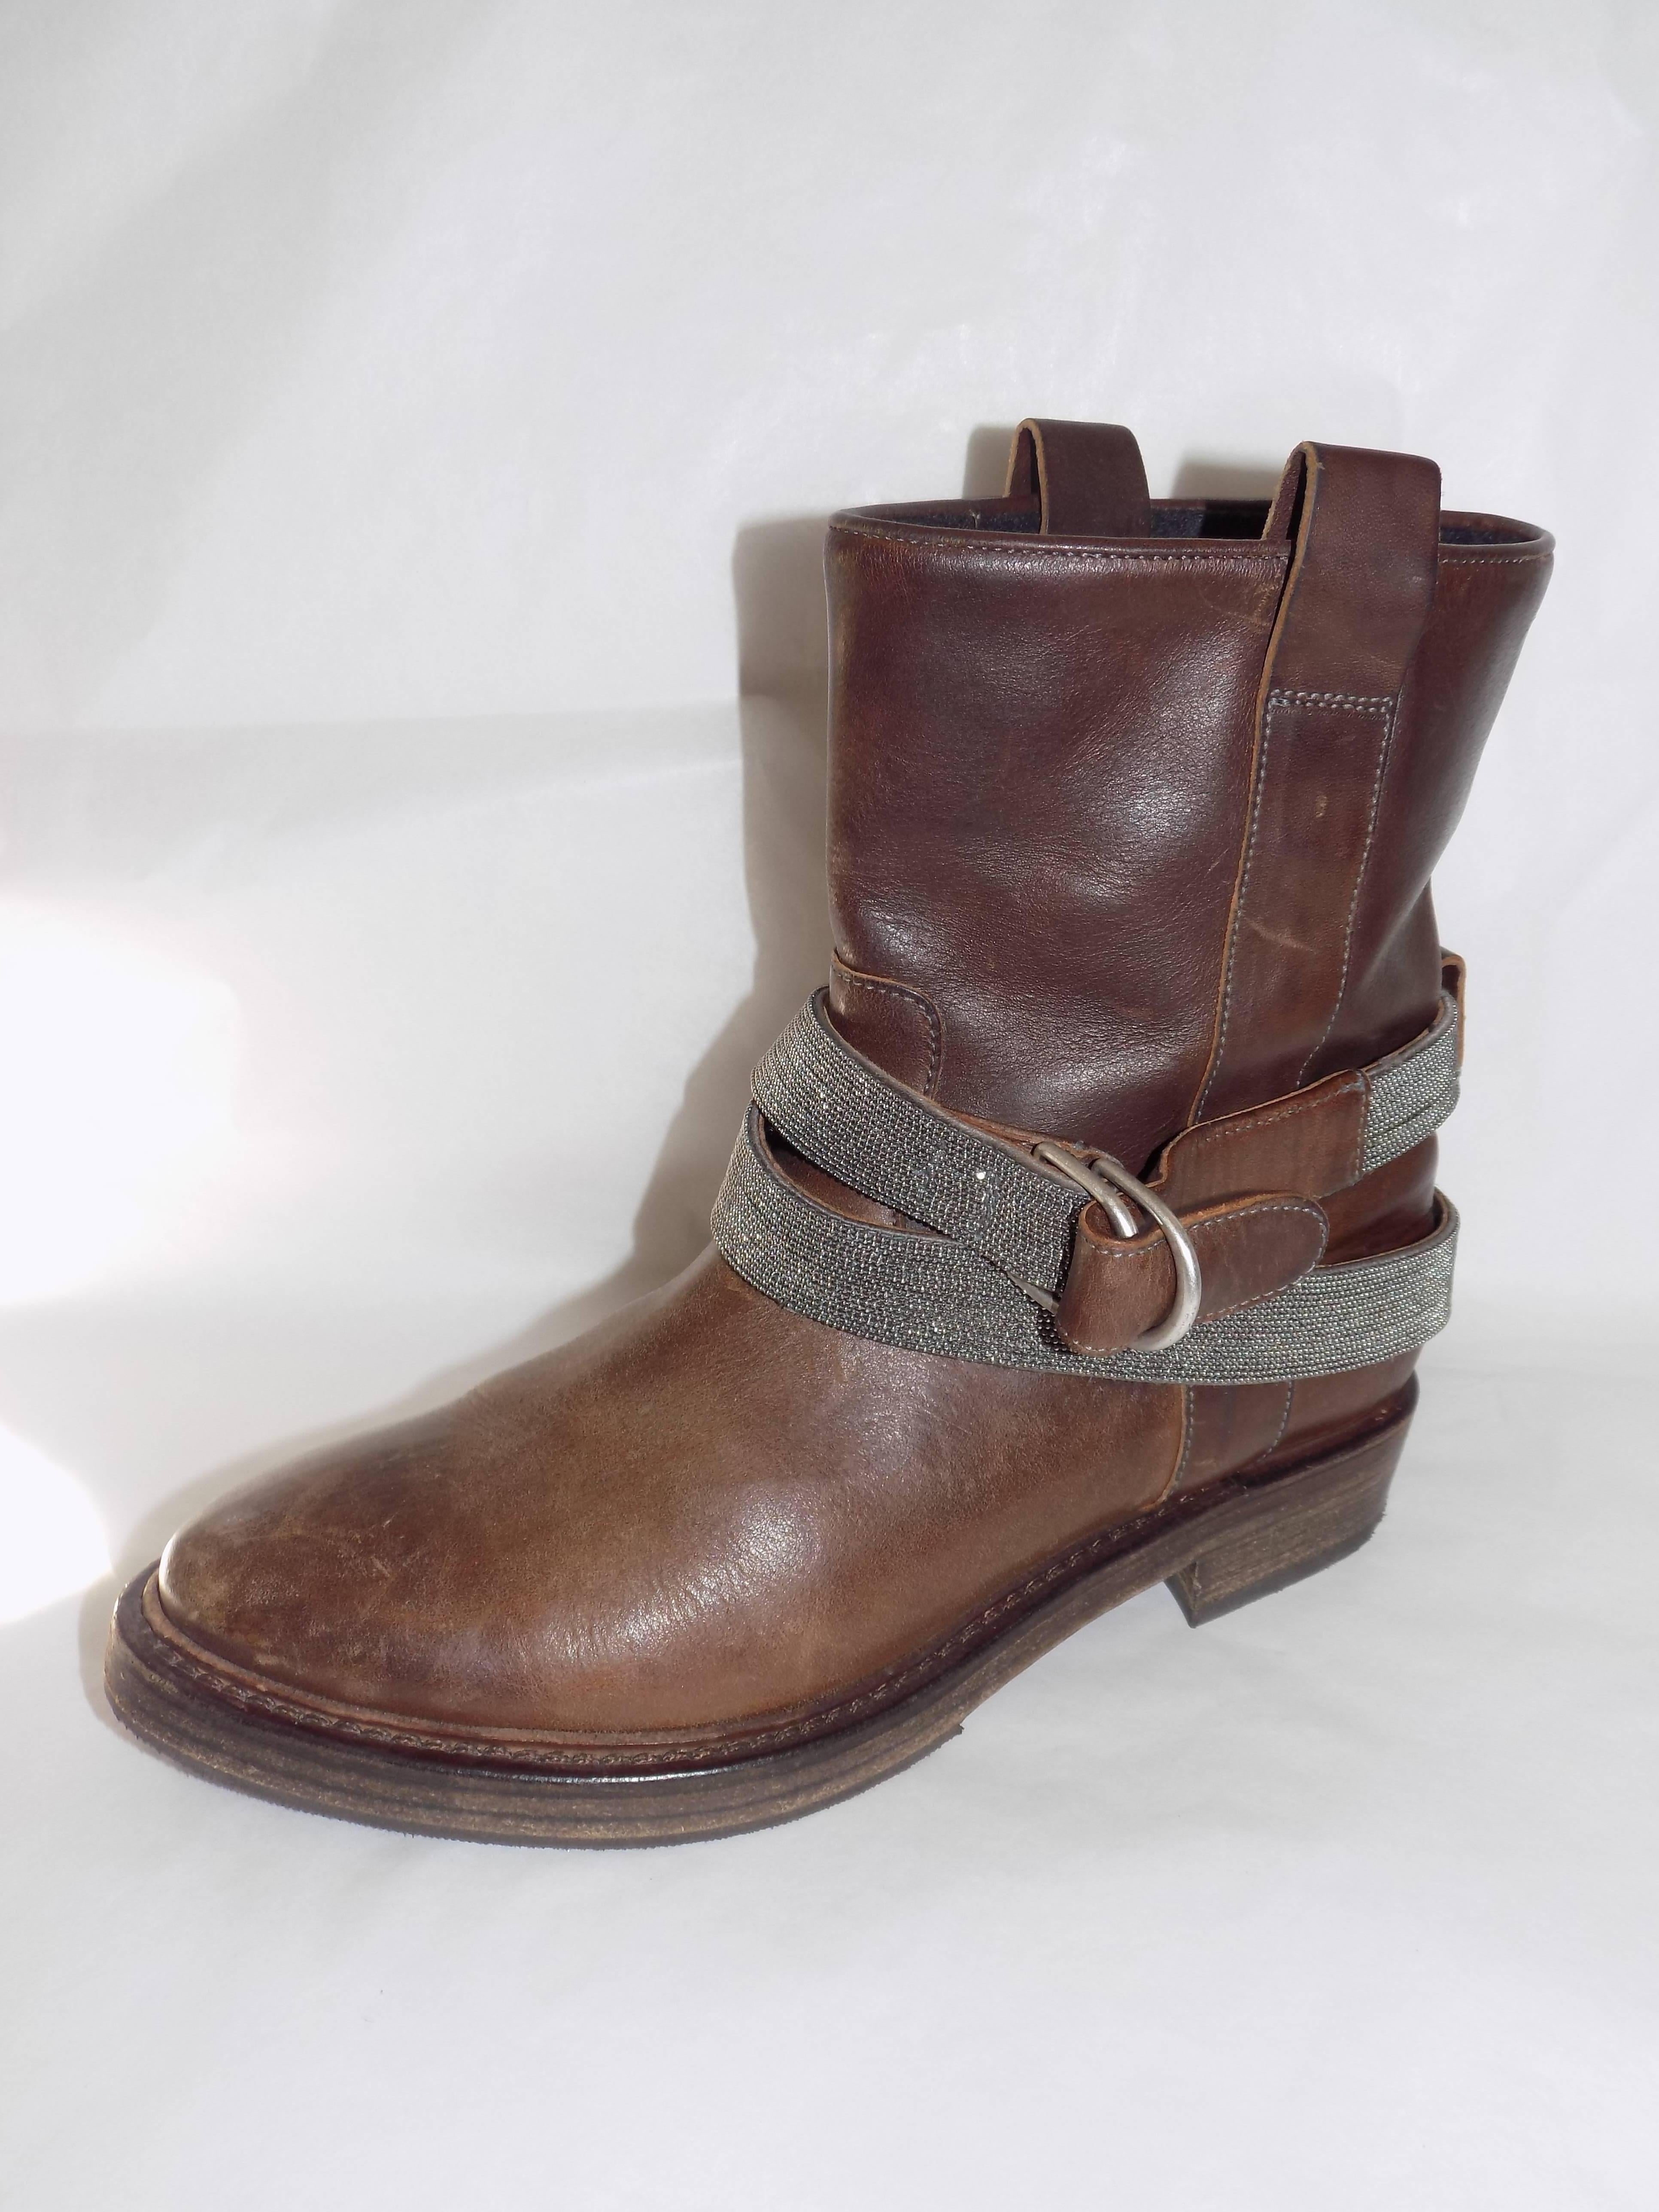 
Brunello Cucinelli's brown ankle boots will quickly become your new go-to pair. Made from 100 percent leather, this Western-inspired pair features wraparound signature monili beaded straps and a metallic buckle. Wear yours with layered knits for a